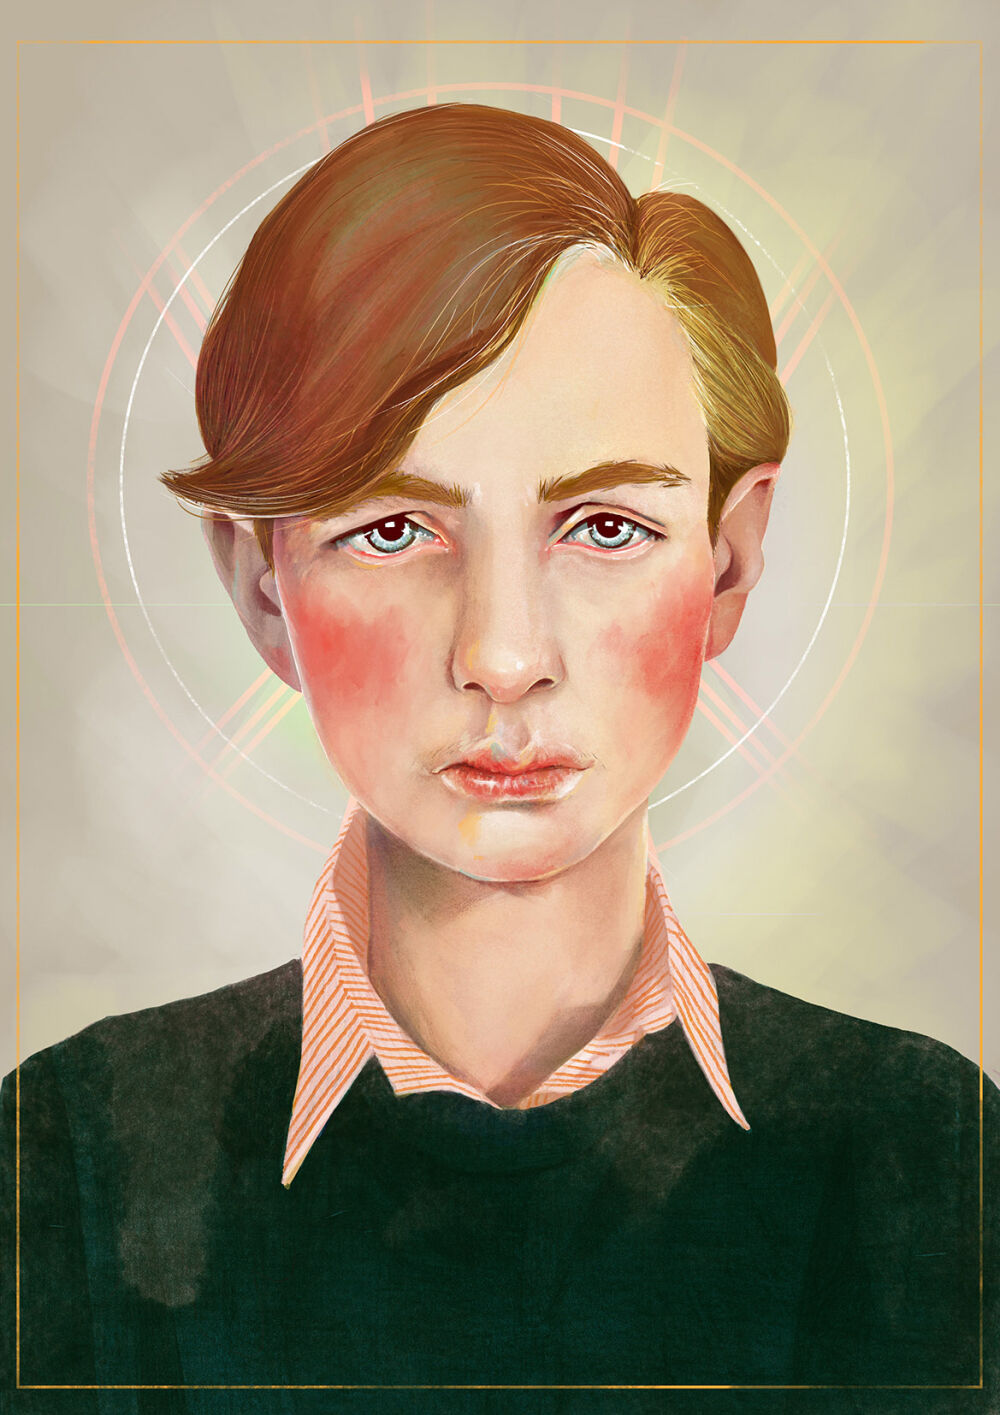 Illustrated portrait by Eplet